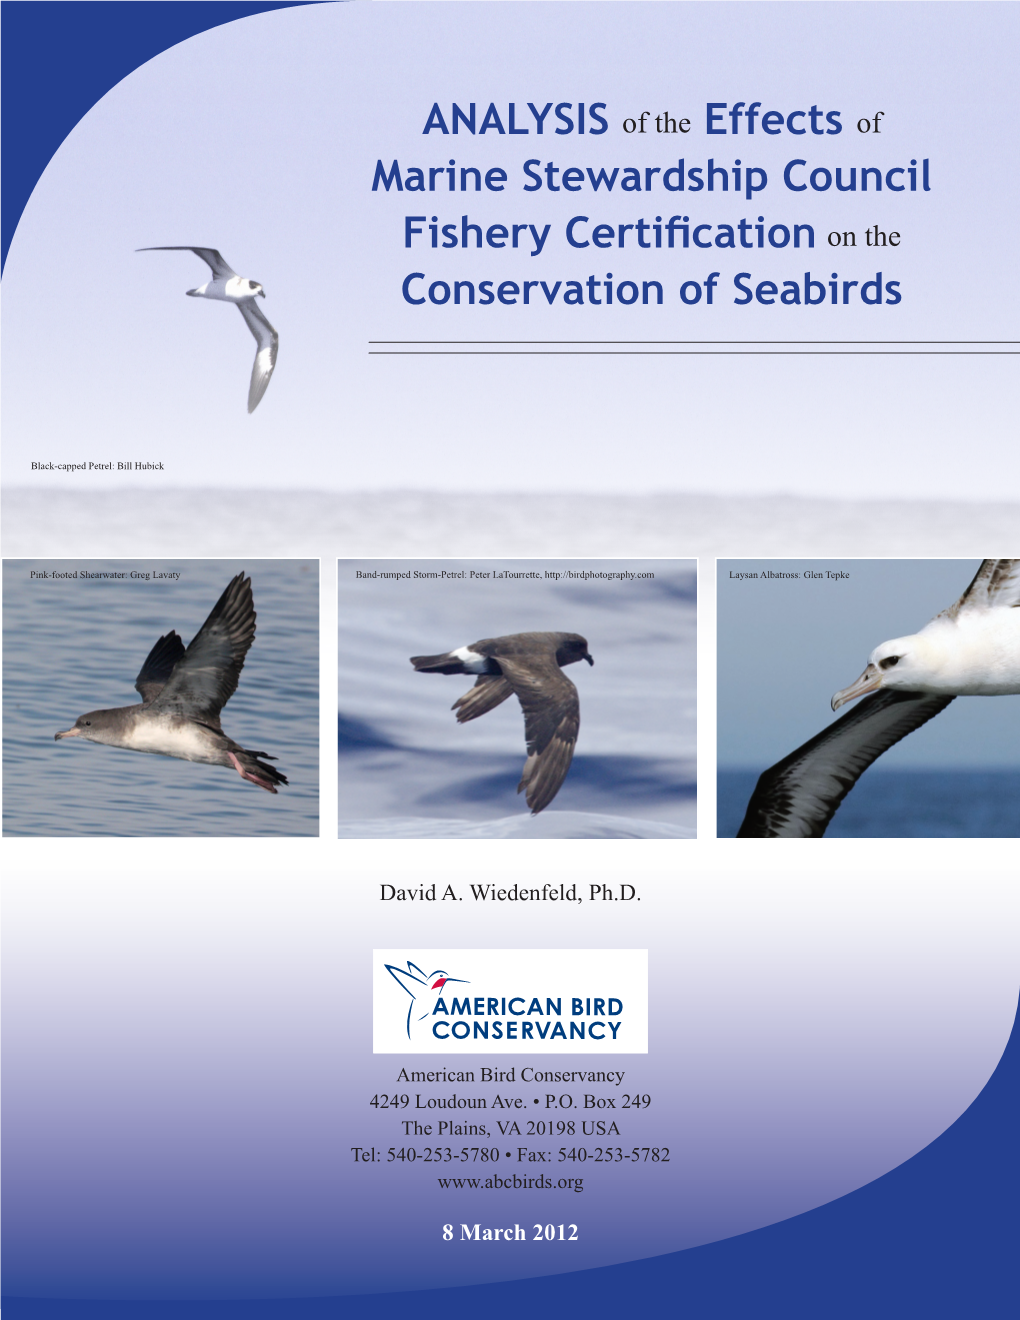 ANALYSIS of the Effects of Marine Stewardship Council Fishery Certification on the Conservation of Seabirds